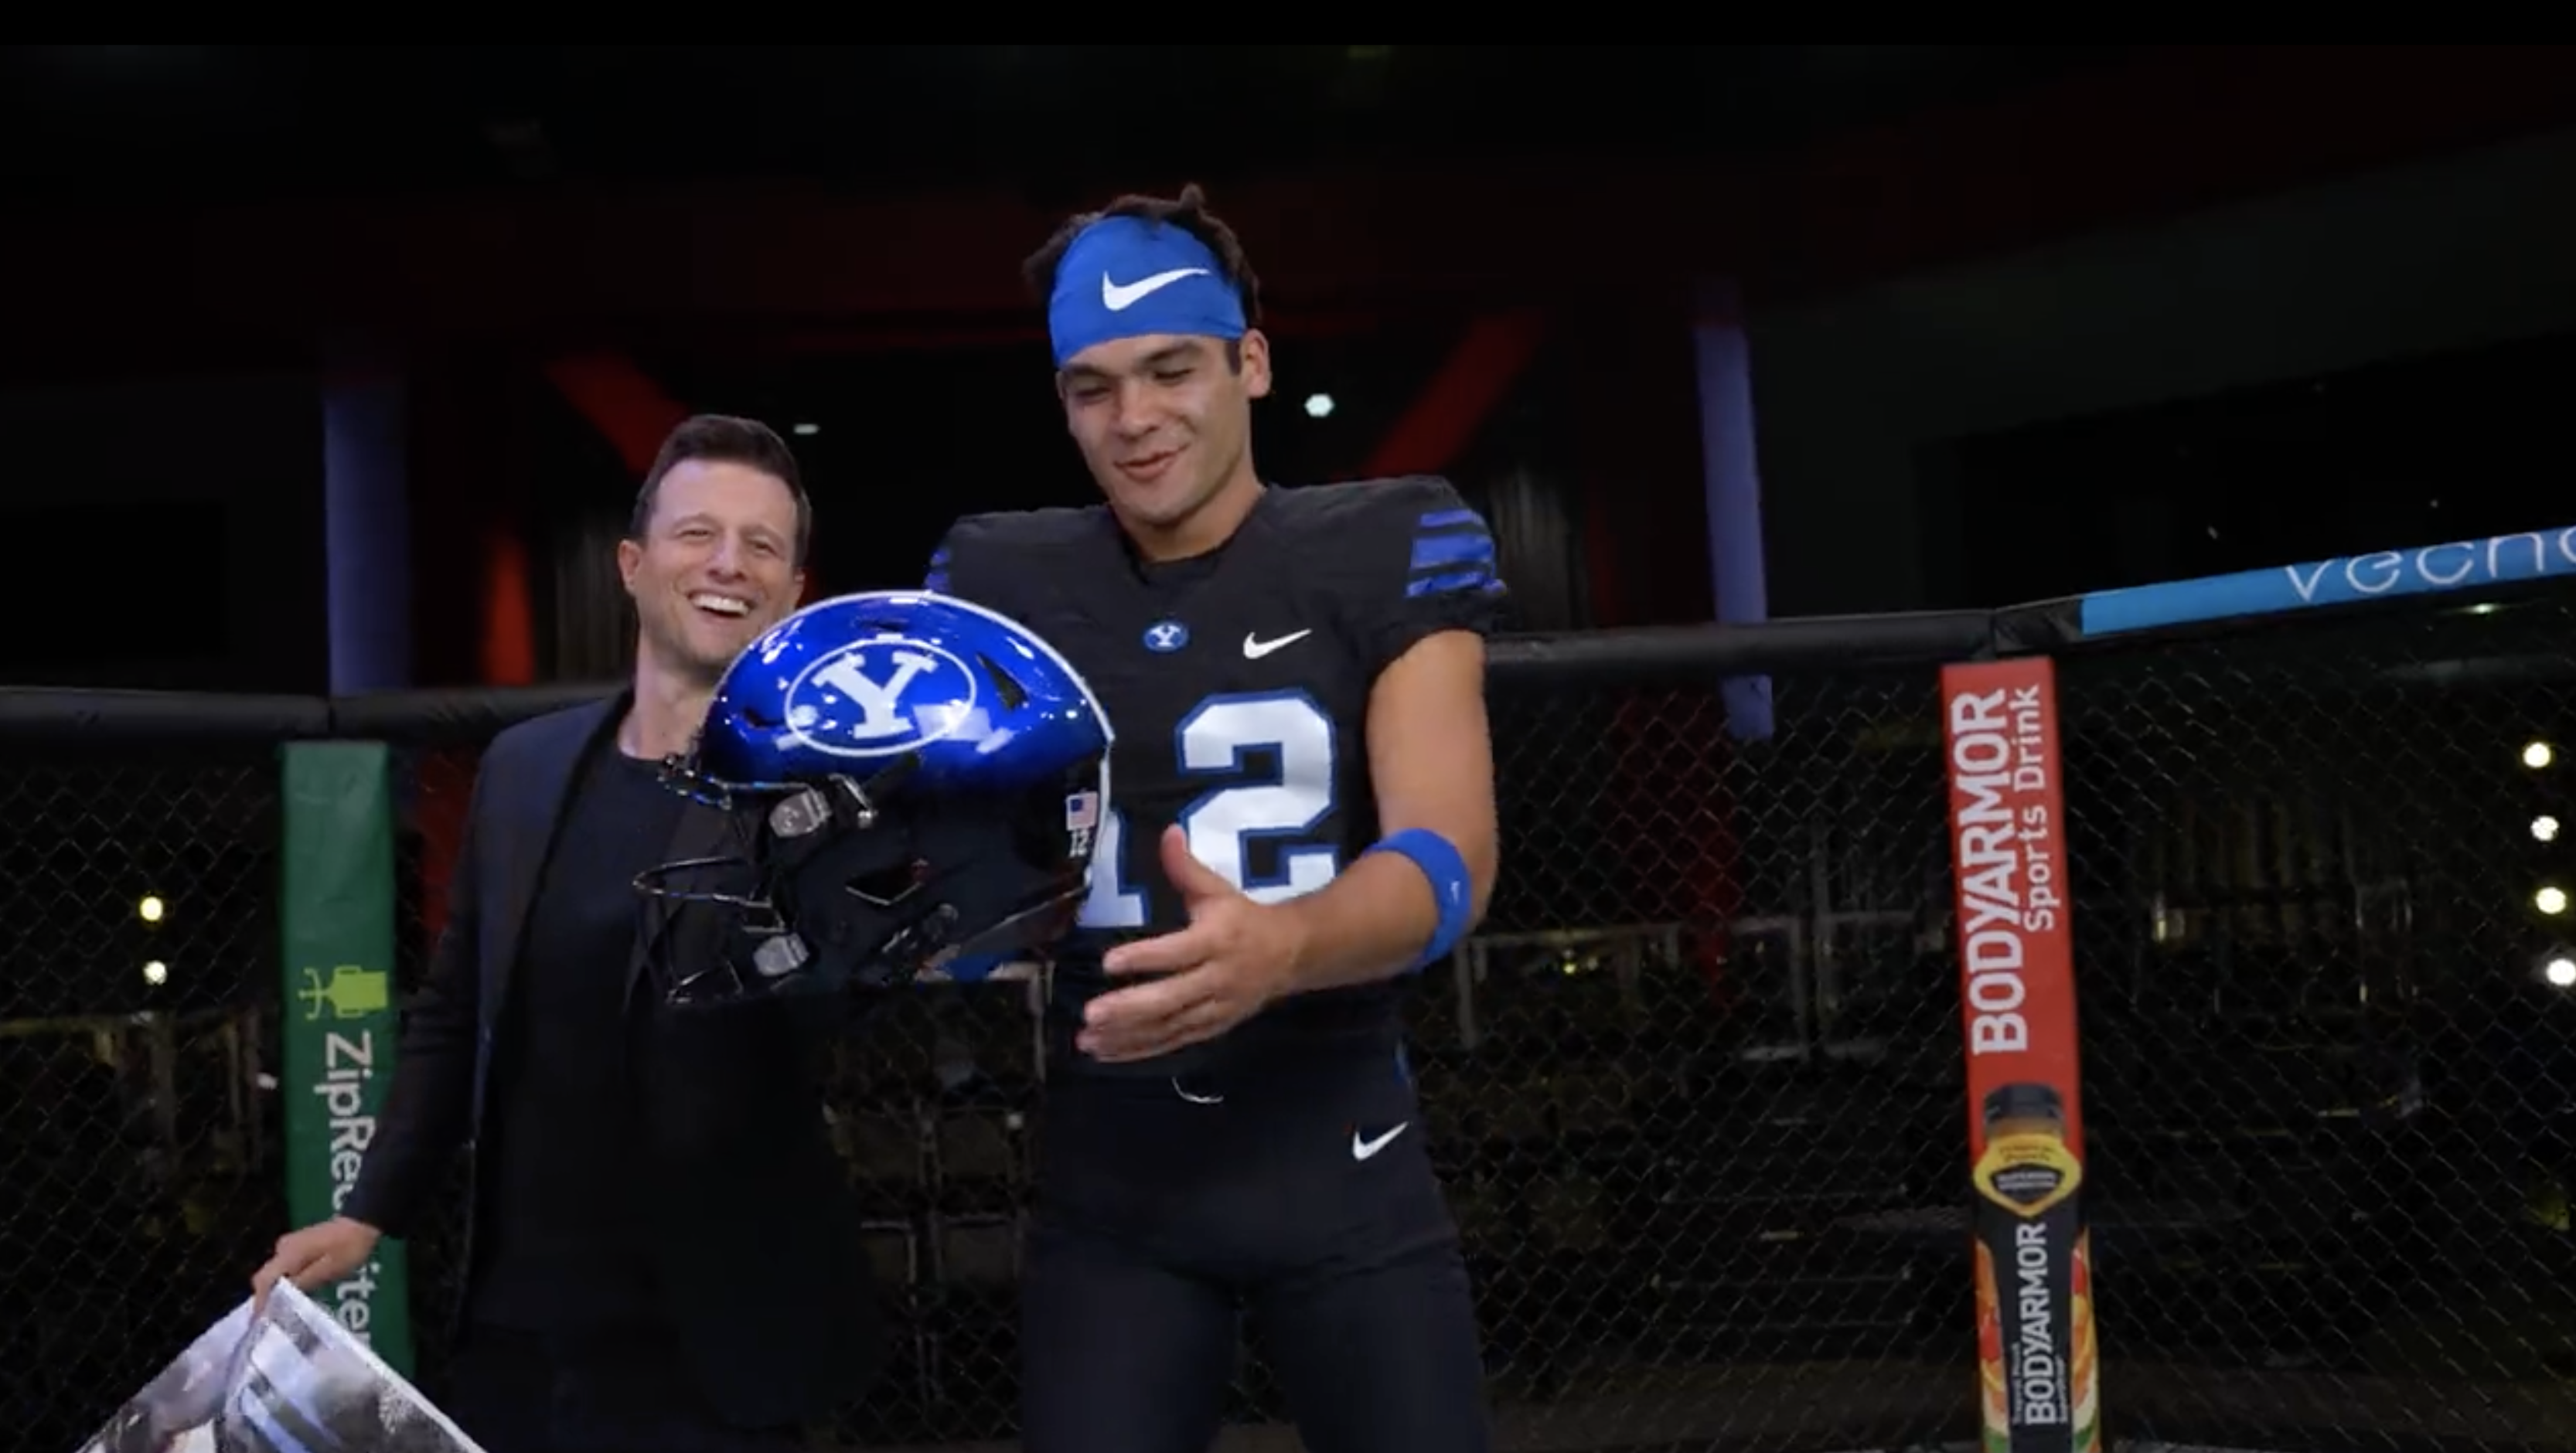 Byu football uniforms with the jersey being royal blue and side stripes  cougar tan. the helmets are cougar tan with a royal blue block cougar logo  on Craiyon